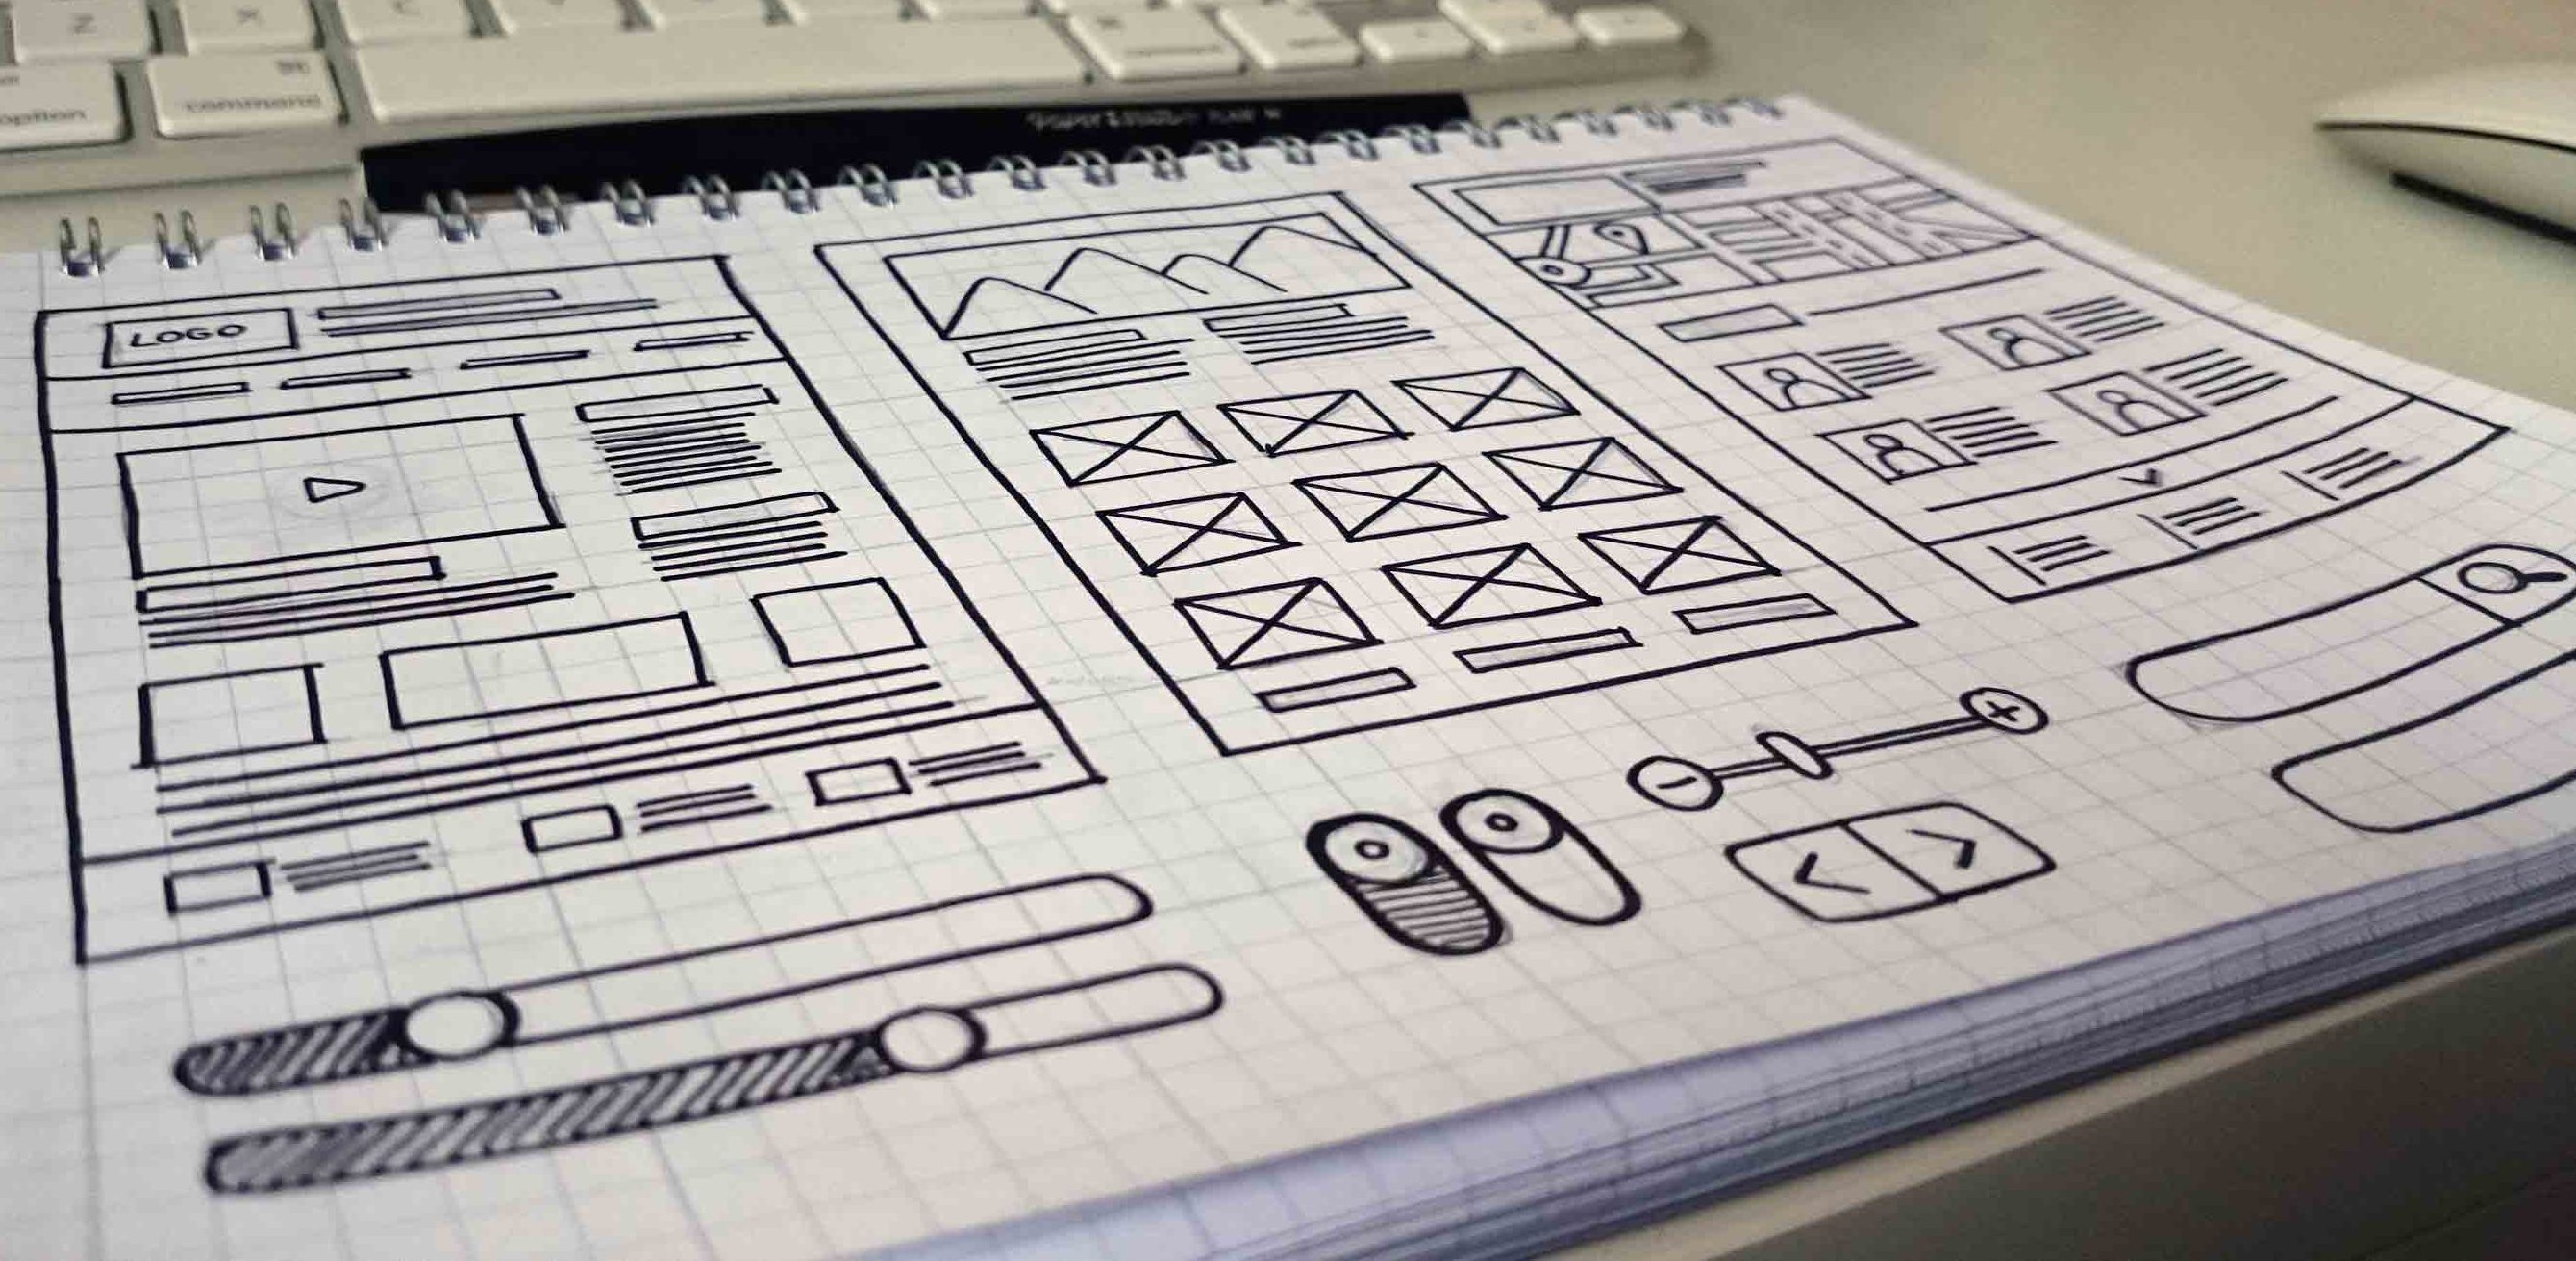 What is a wireframe?